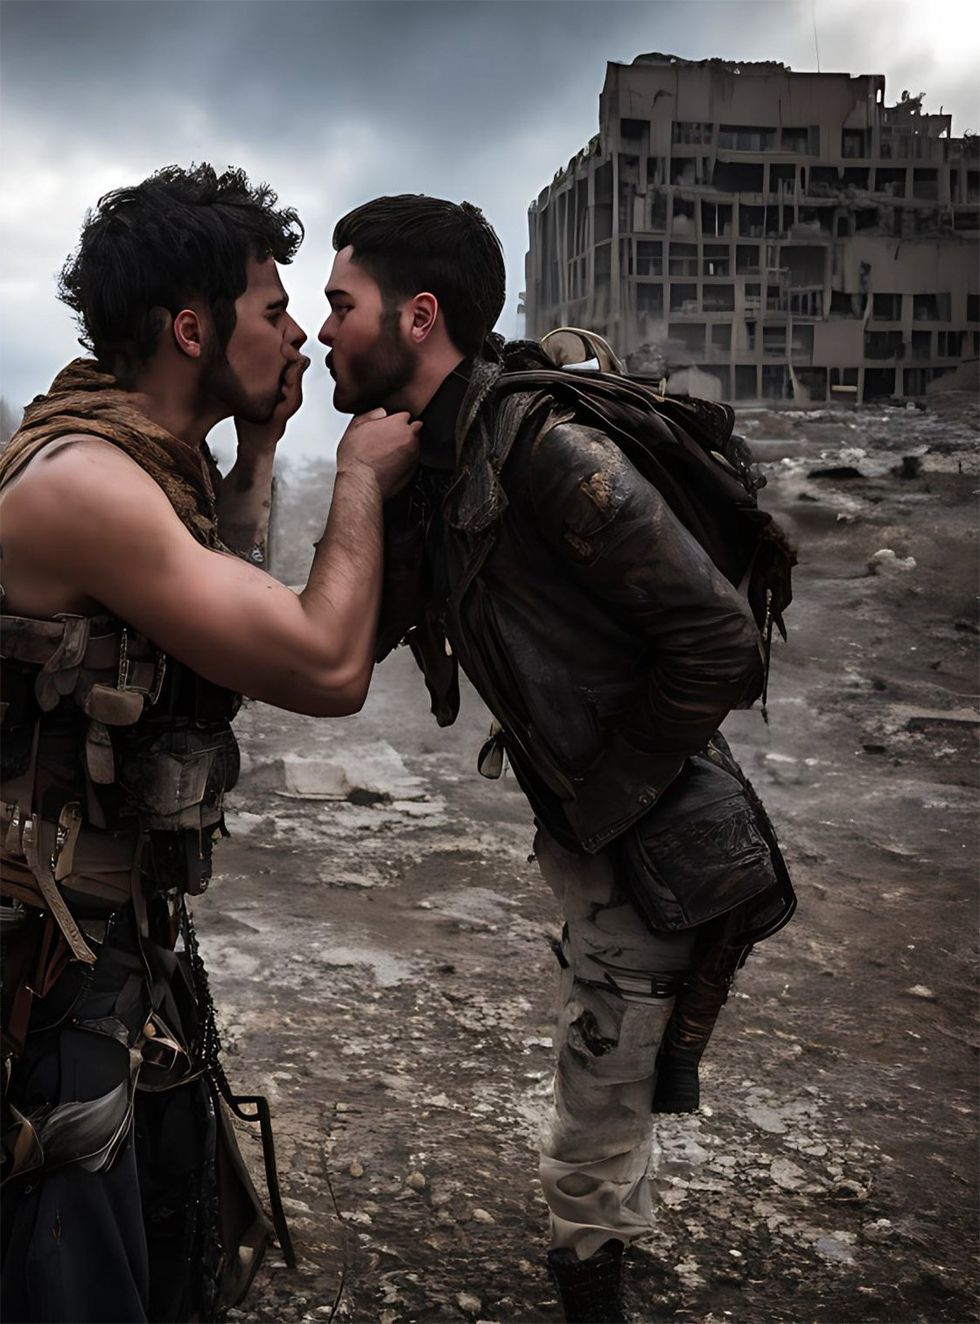 Sniffies.com takes a deep, hard, and penetrating look at queer sex after the apocalypse \u2013 with pics!